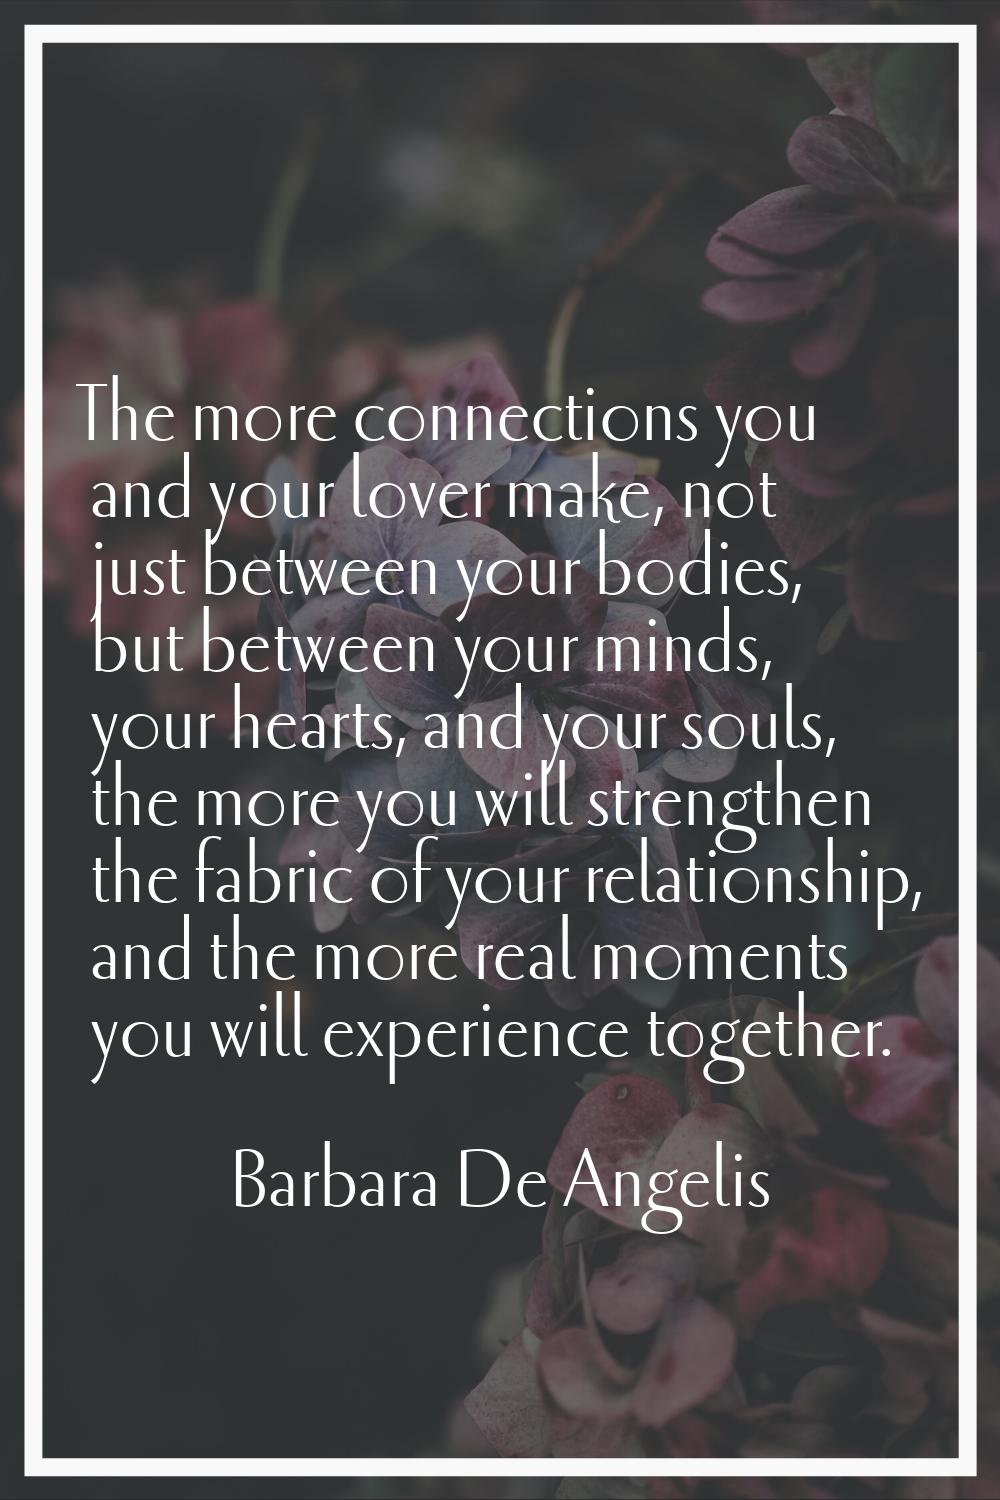 The more connections you and your lover make, not just between your bodies, but between your minds,